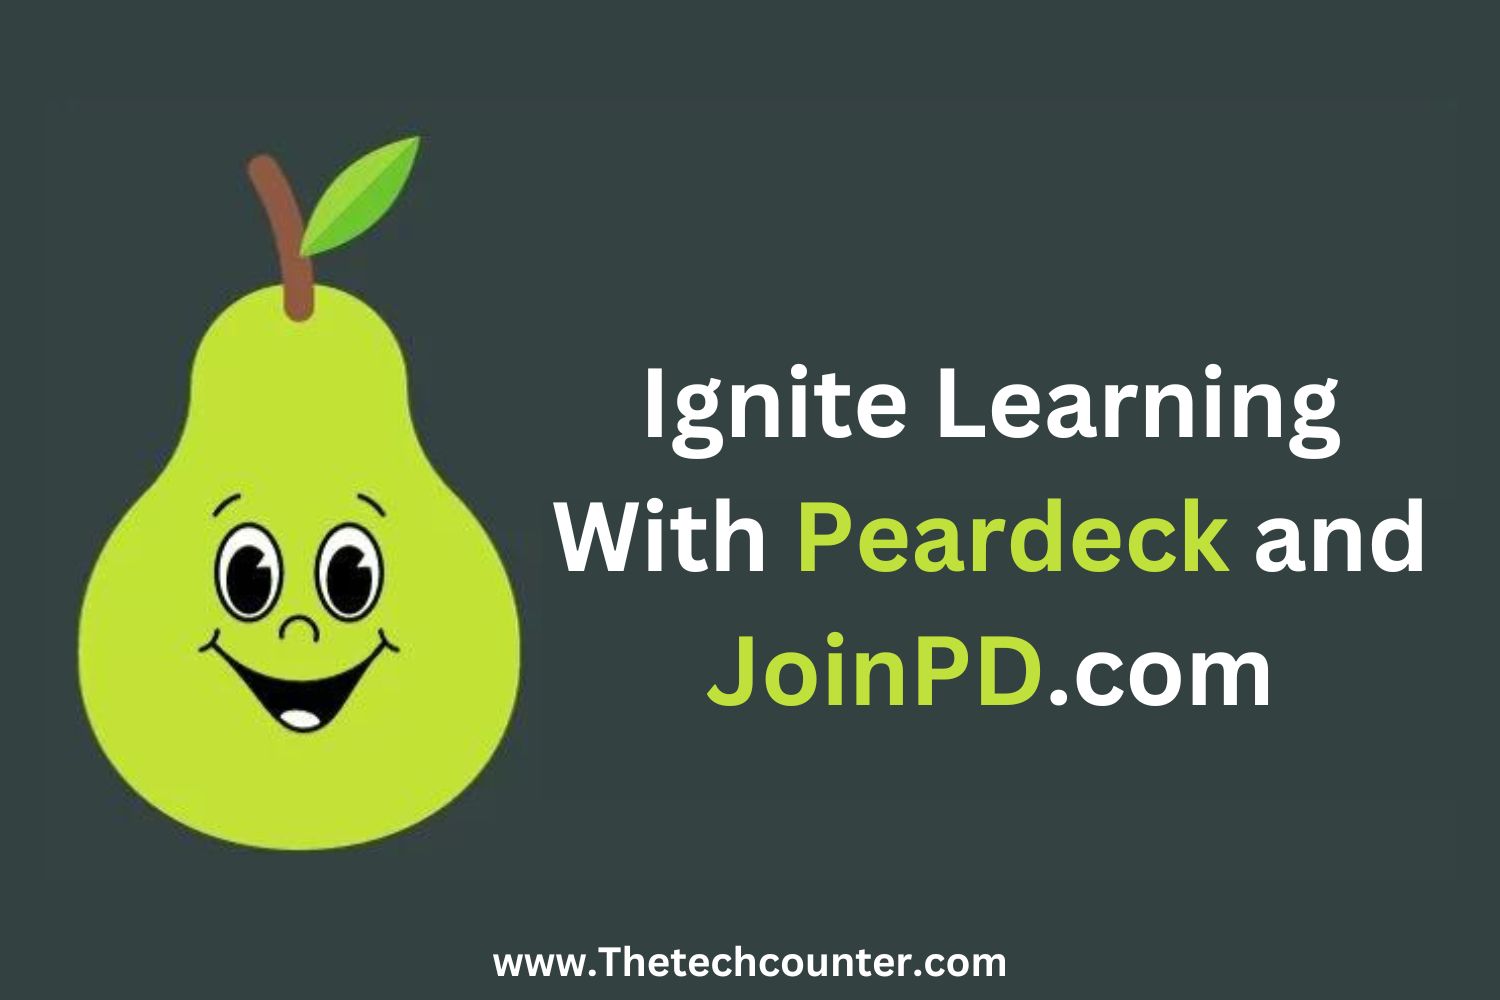 Peardeck and JoinPD.com